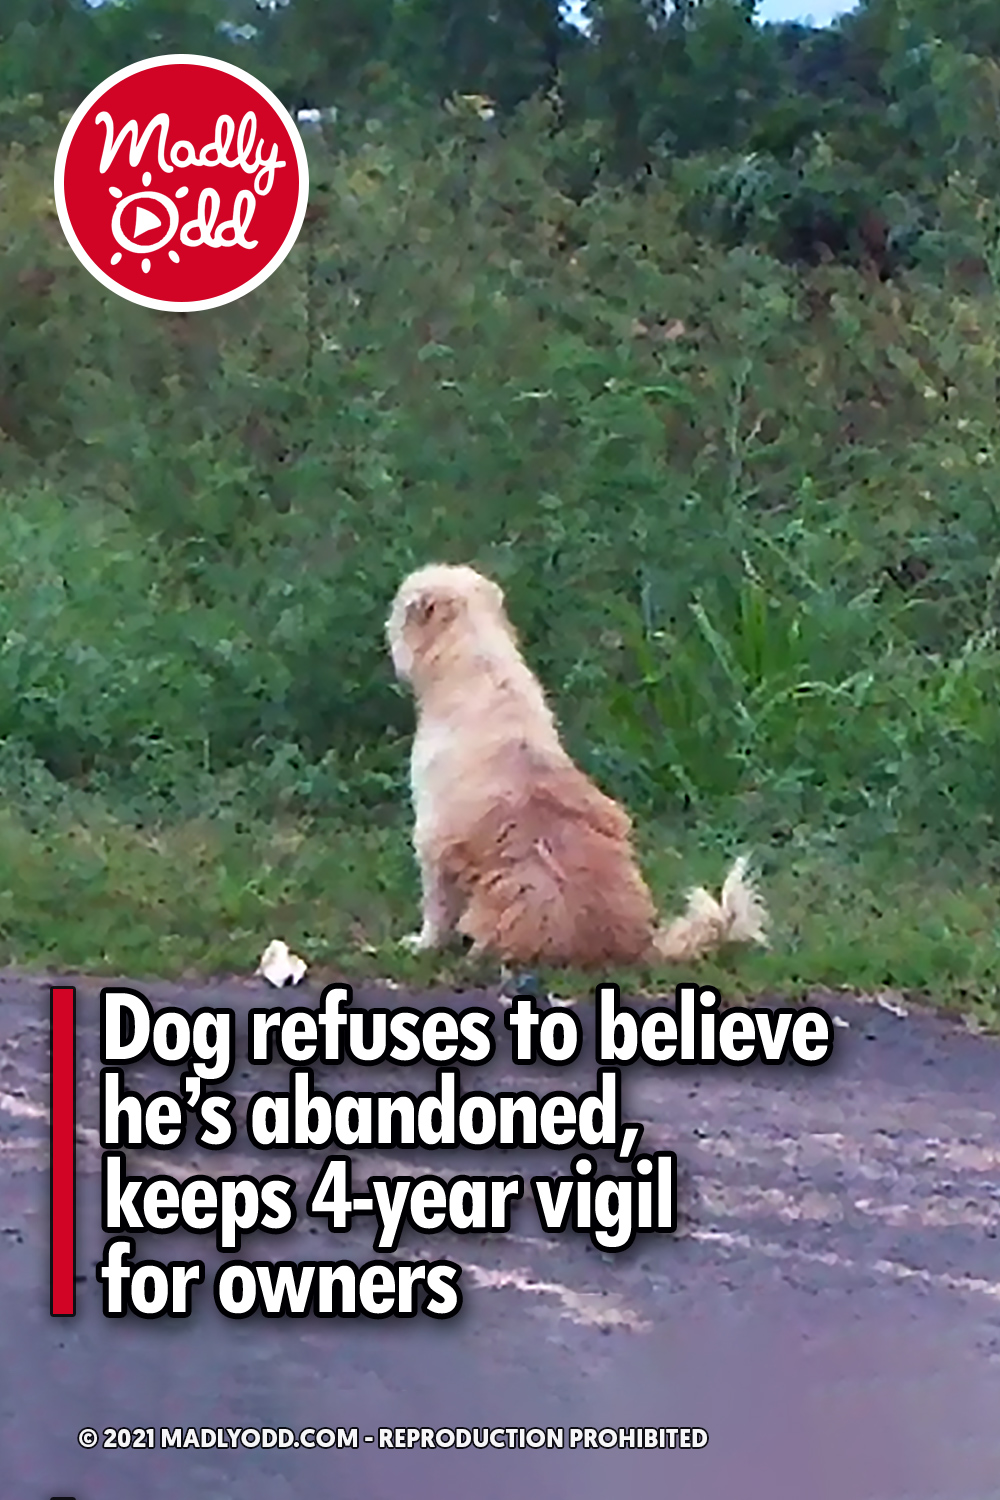 Dog refuses to believe he’s abandoned, keeps 4-year vigil for owners